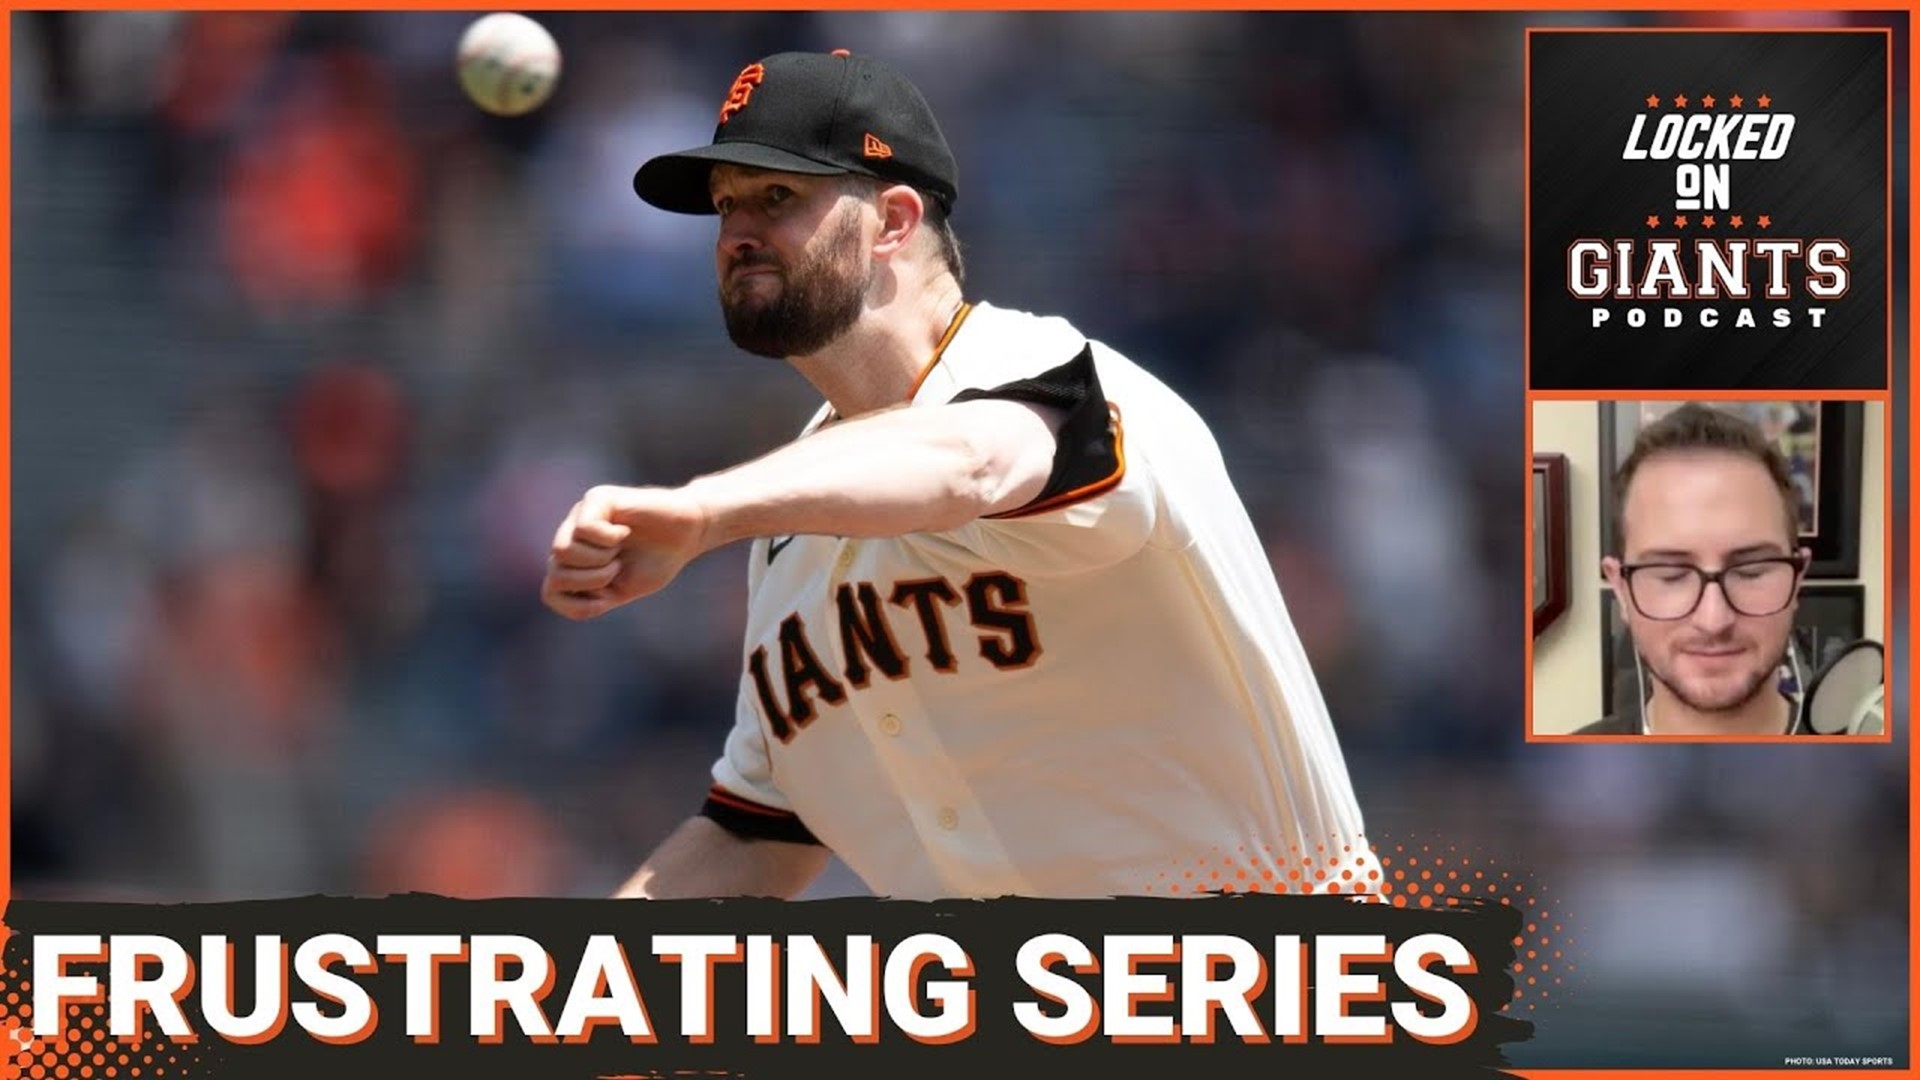 SF Giants lose frustrating series vs. Pirates; why Game 2 was the "one that got away"